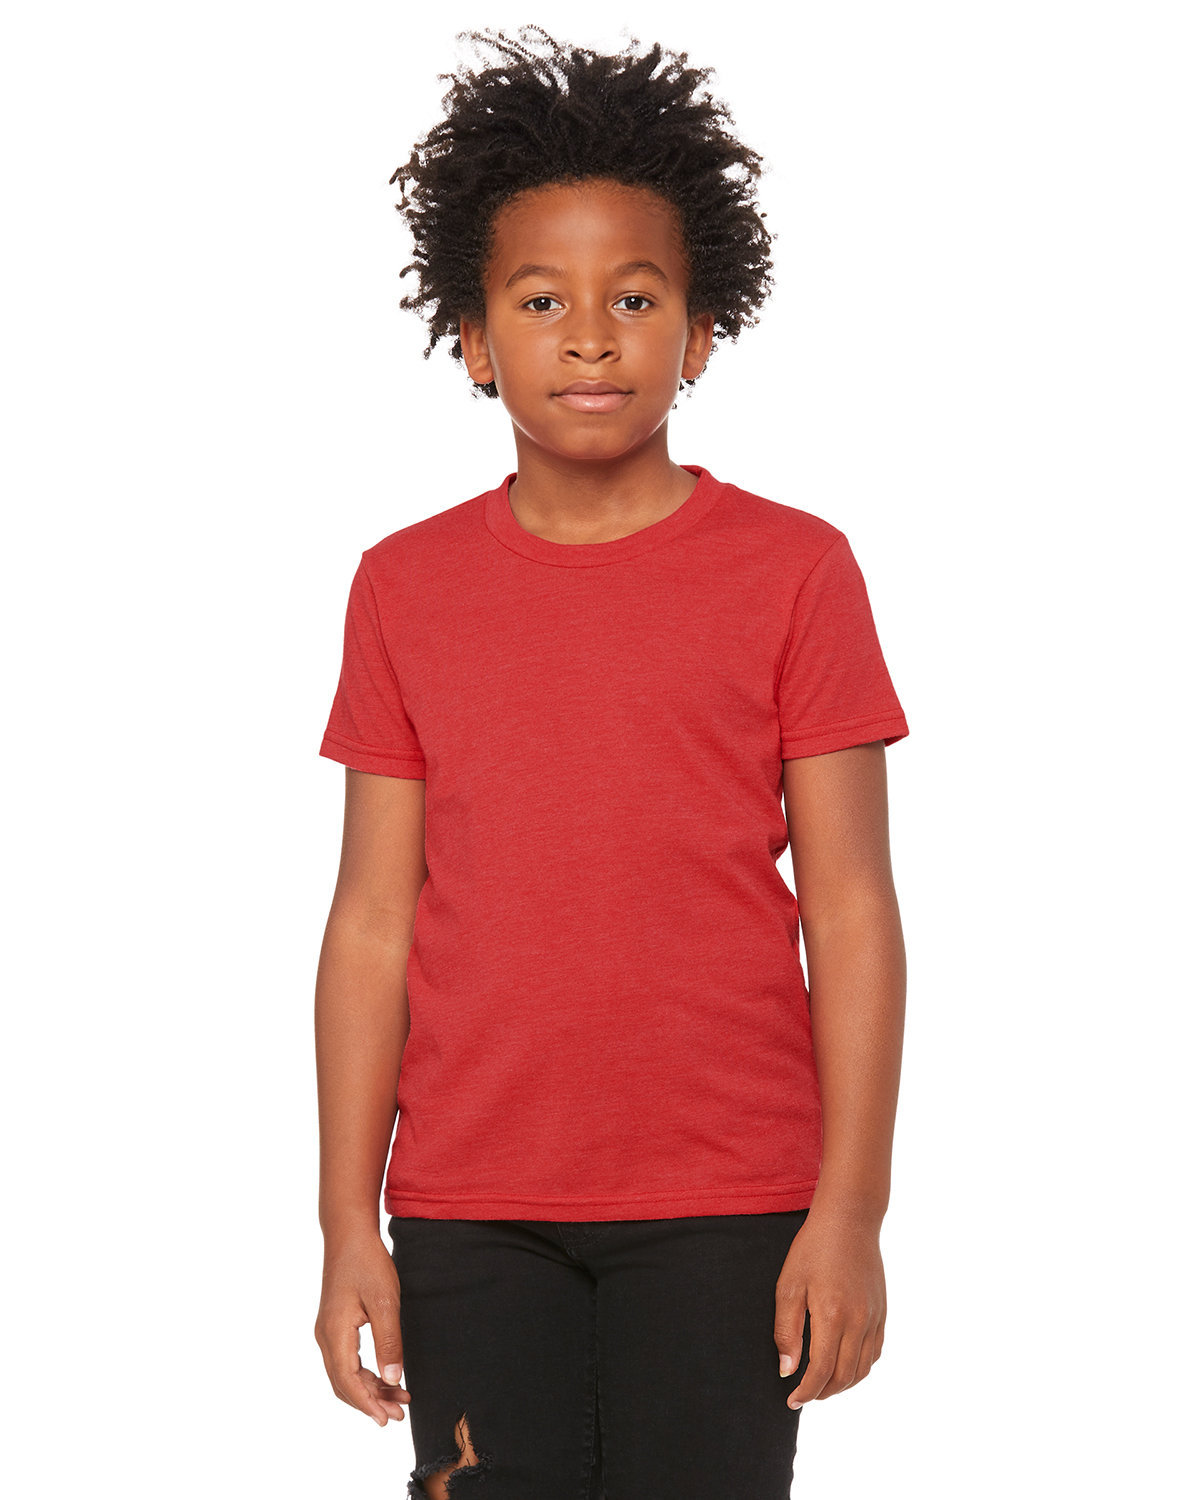 Bella + Canvas Youth CVC Jersey T-Shirt HEATHER RED 